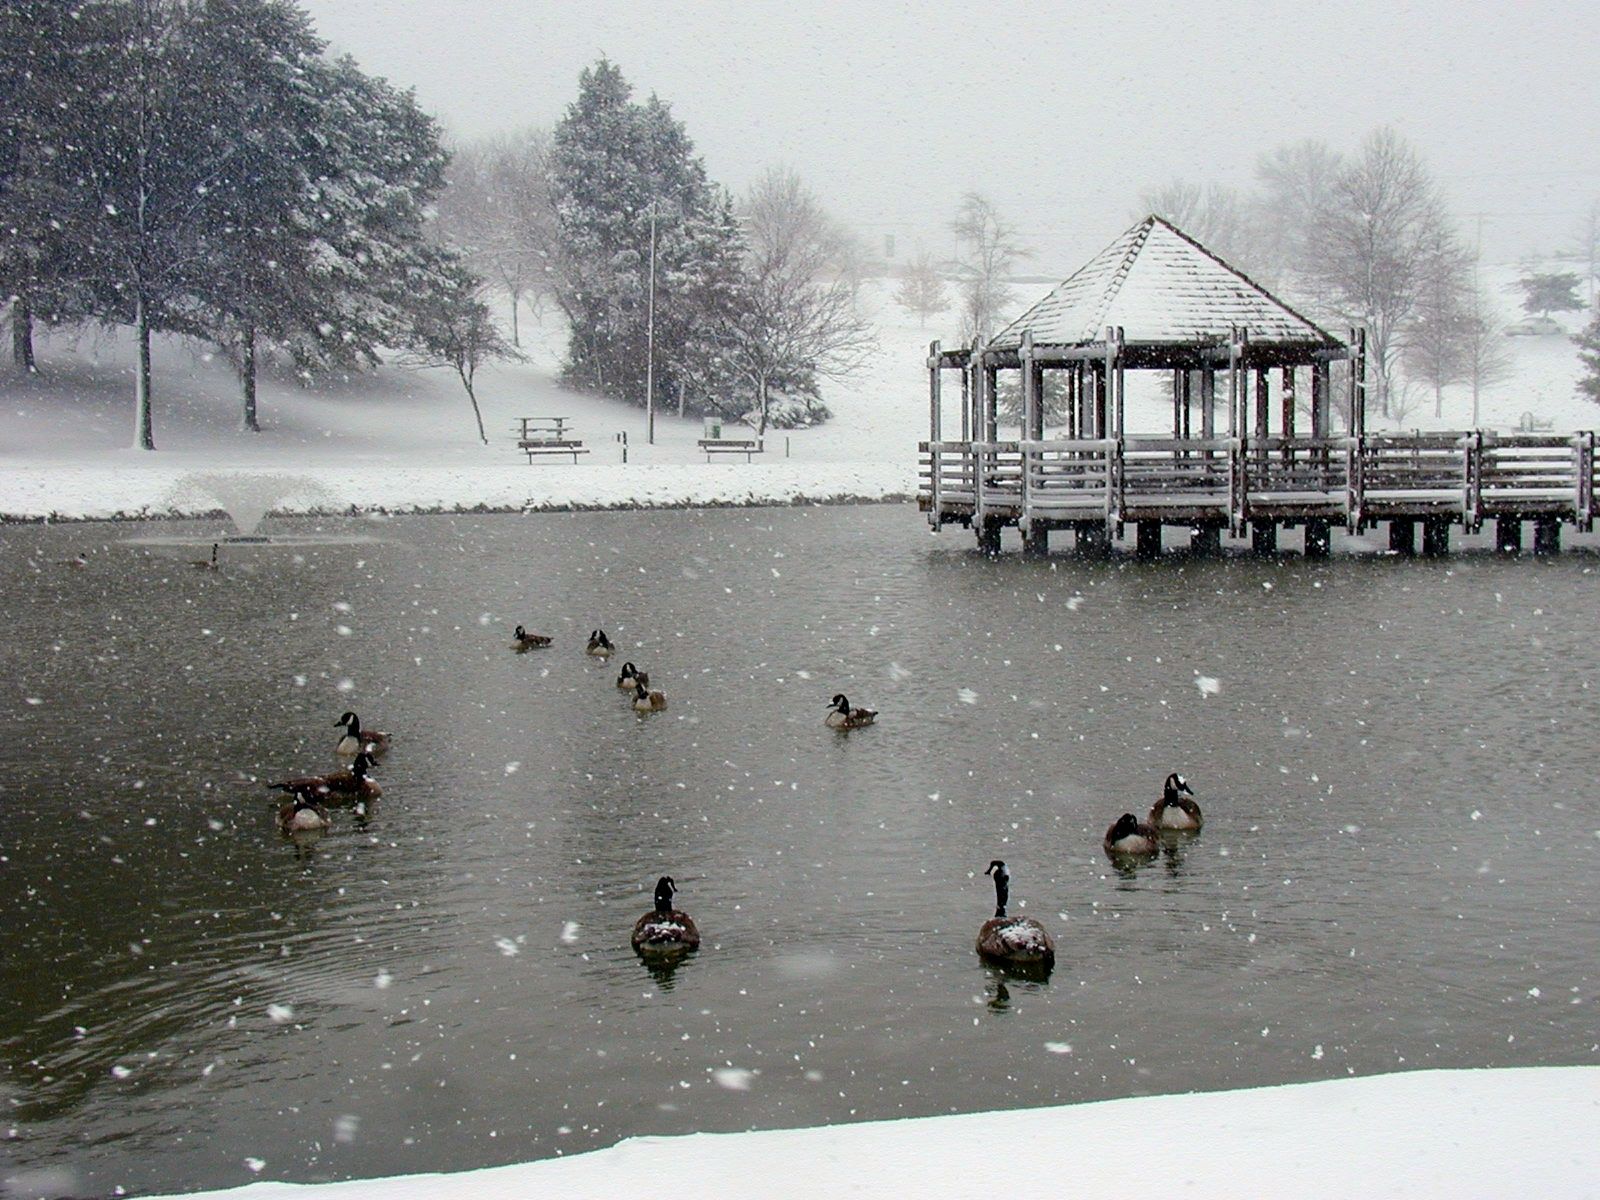 Ducks swimming in a lake at Vlasis Park in Ballwin, Missouri with a gazebo in the background.